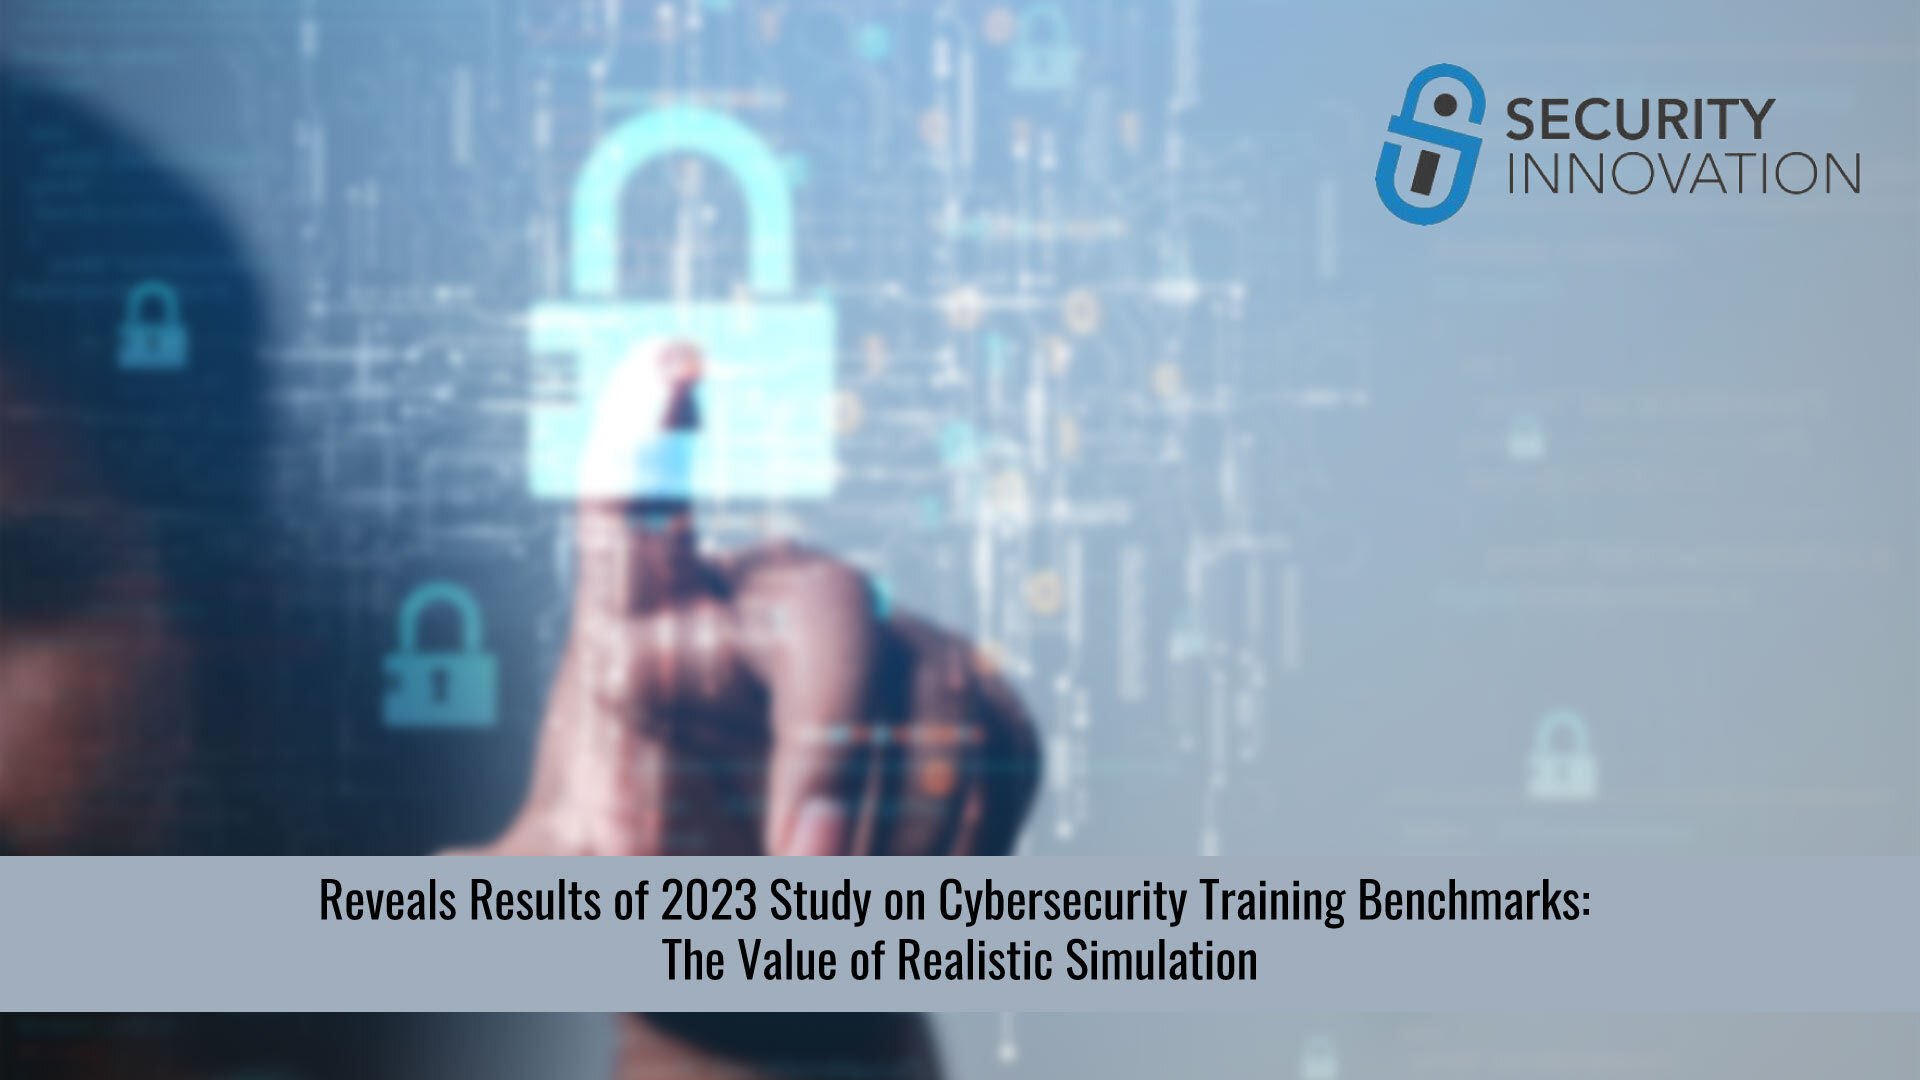 Ponemon Cybersecurity Training Study Finds Significant Shifts In Cybersecurity Training Over Past Two Years with 24% Higher Use of Simulated Environments